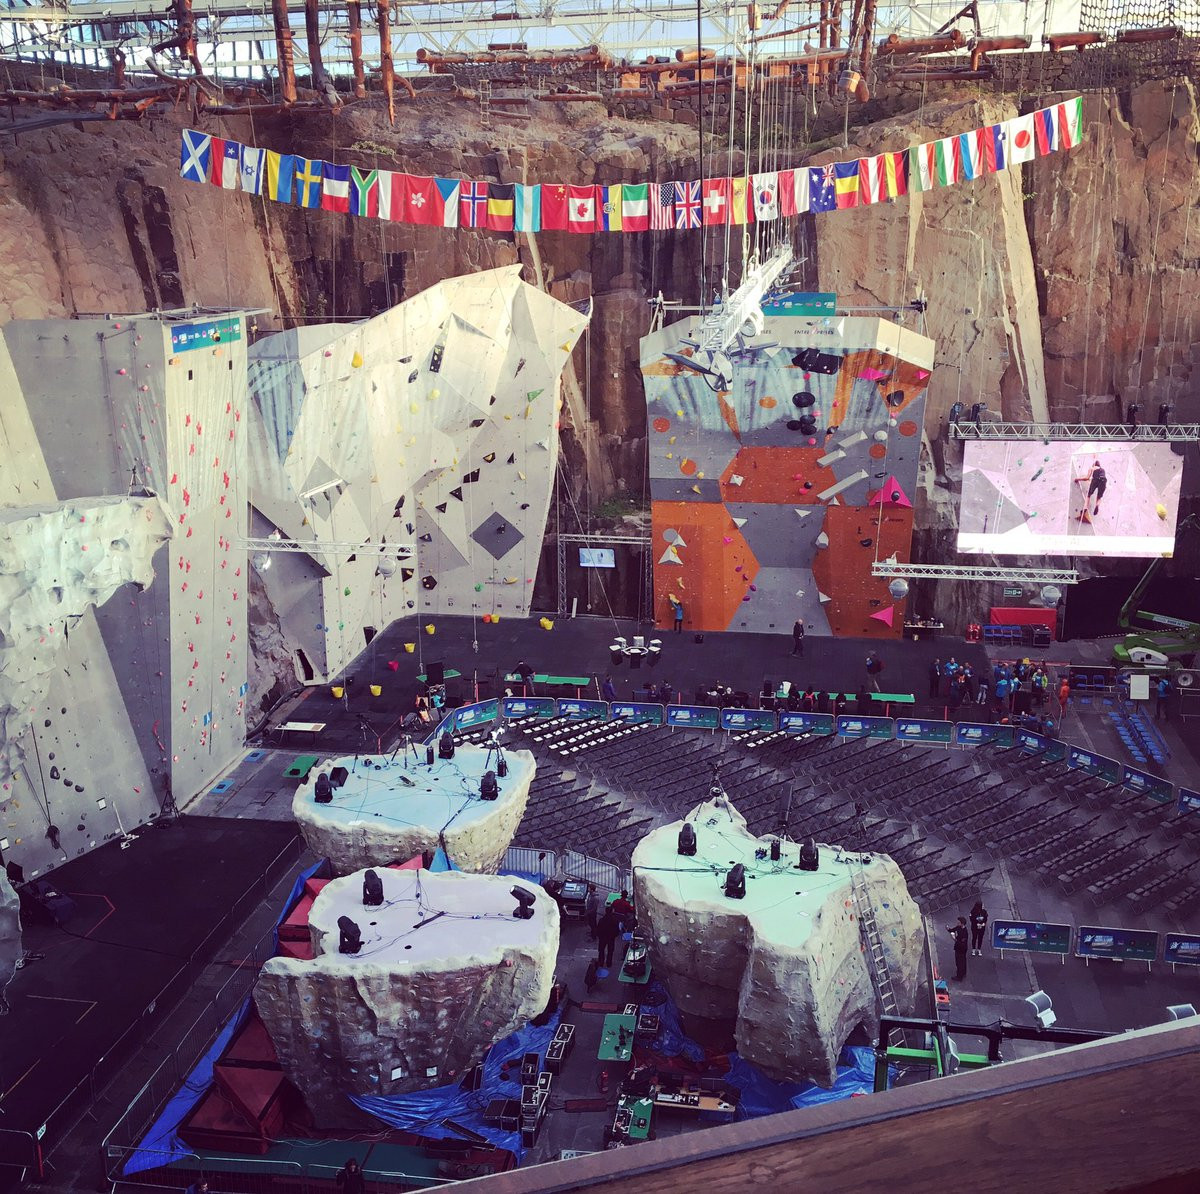 The Edinburgh International Climbing Arena, where this weekend's IFSC Lead and Speed World Cup event is taking place ©Twitter